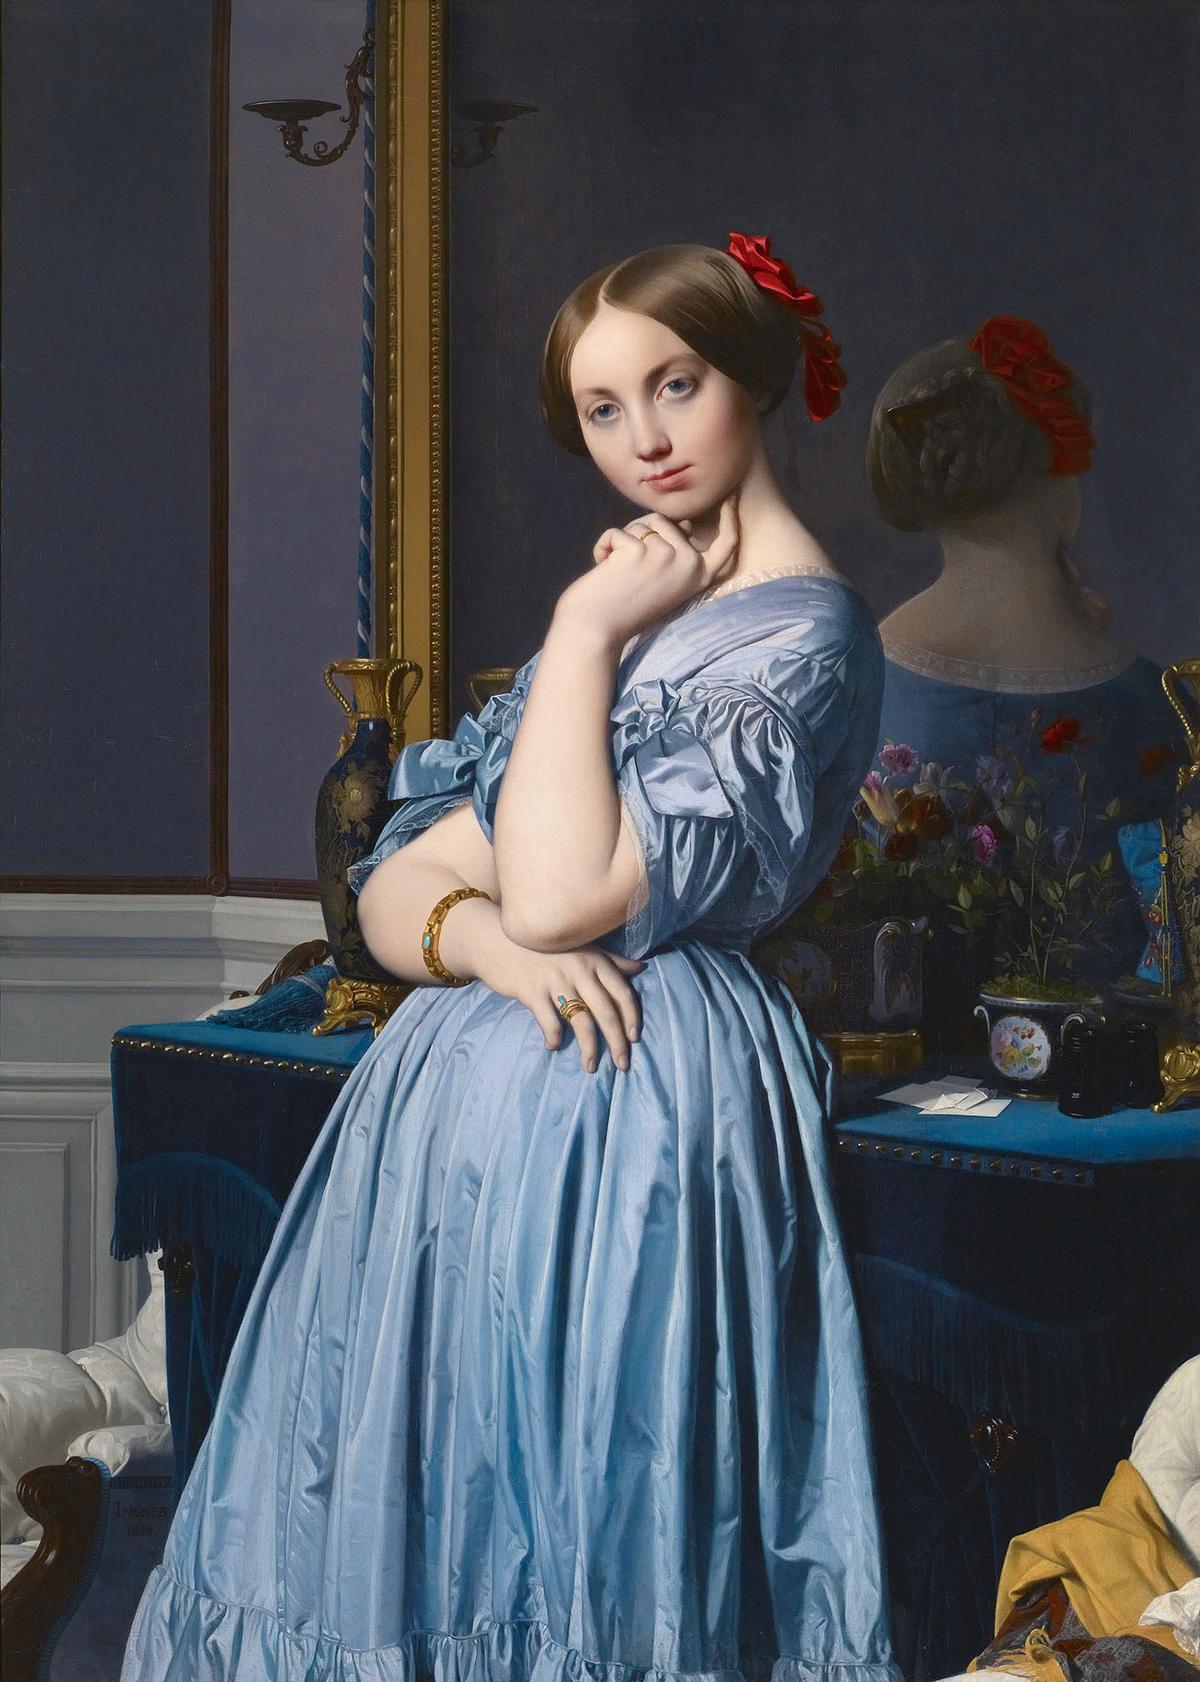 "Louise, Princesse de Broglie, Later the Comtesse d’Haussonville," 1845, by Jean-Auguste-Dominique Ingres. Oil on canvas, 51 7/8 inches by 36 1/4 inches. The Frick Collection, New York City. (Public Domain)